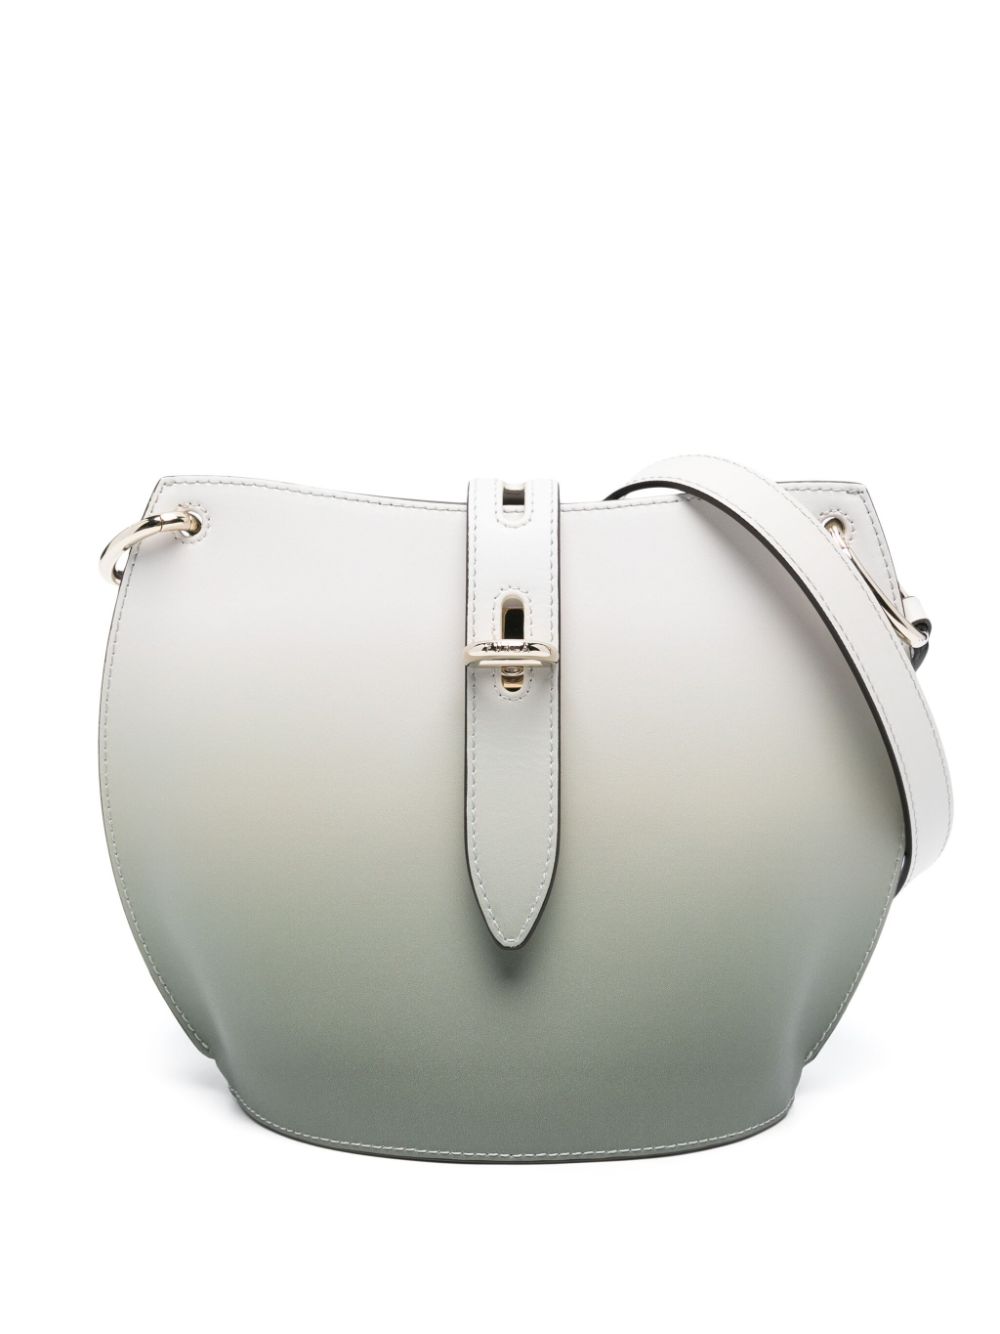 Furla Unica Gradient Leather Bag In Green